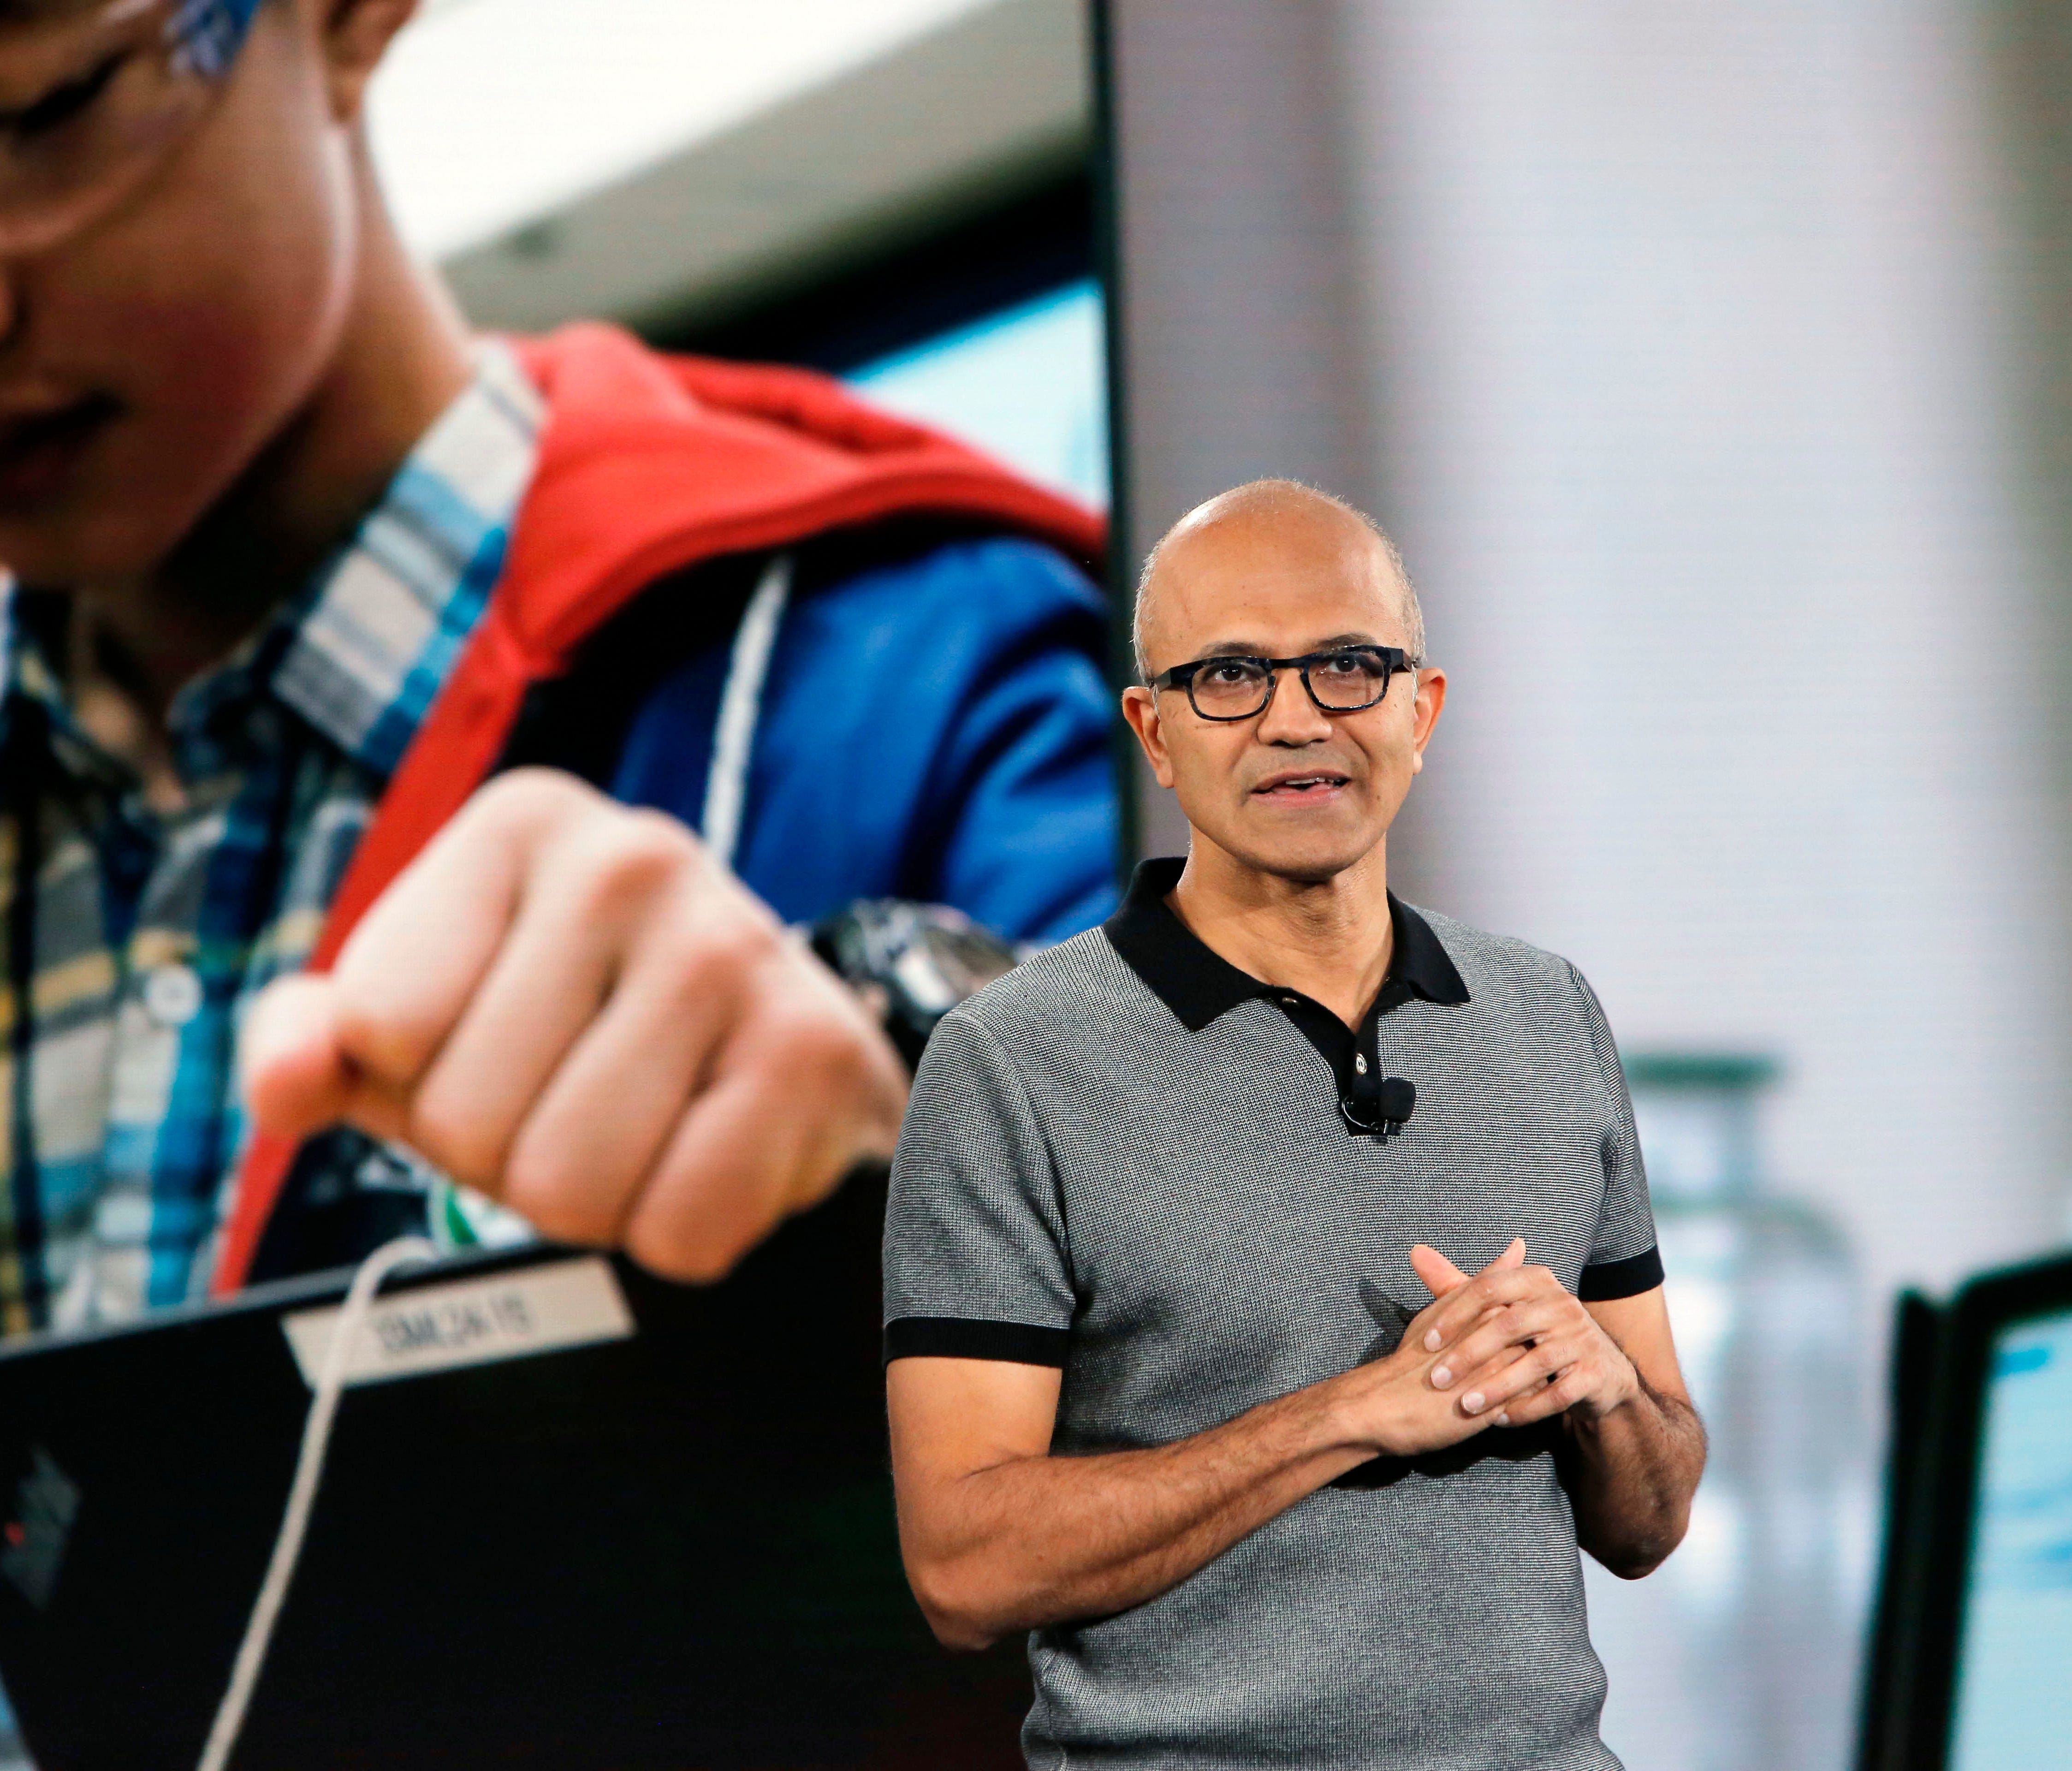 Microsoft CEO Satya Nadella discusses student empowerment at the Microsoft Education event in New York.